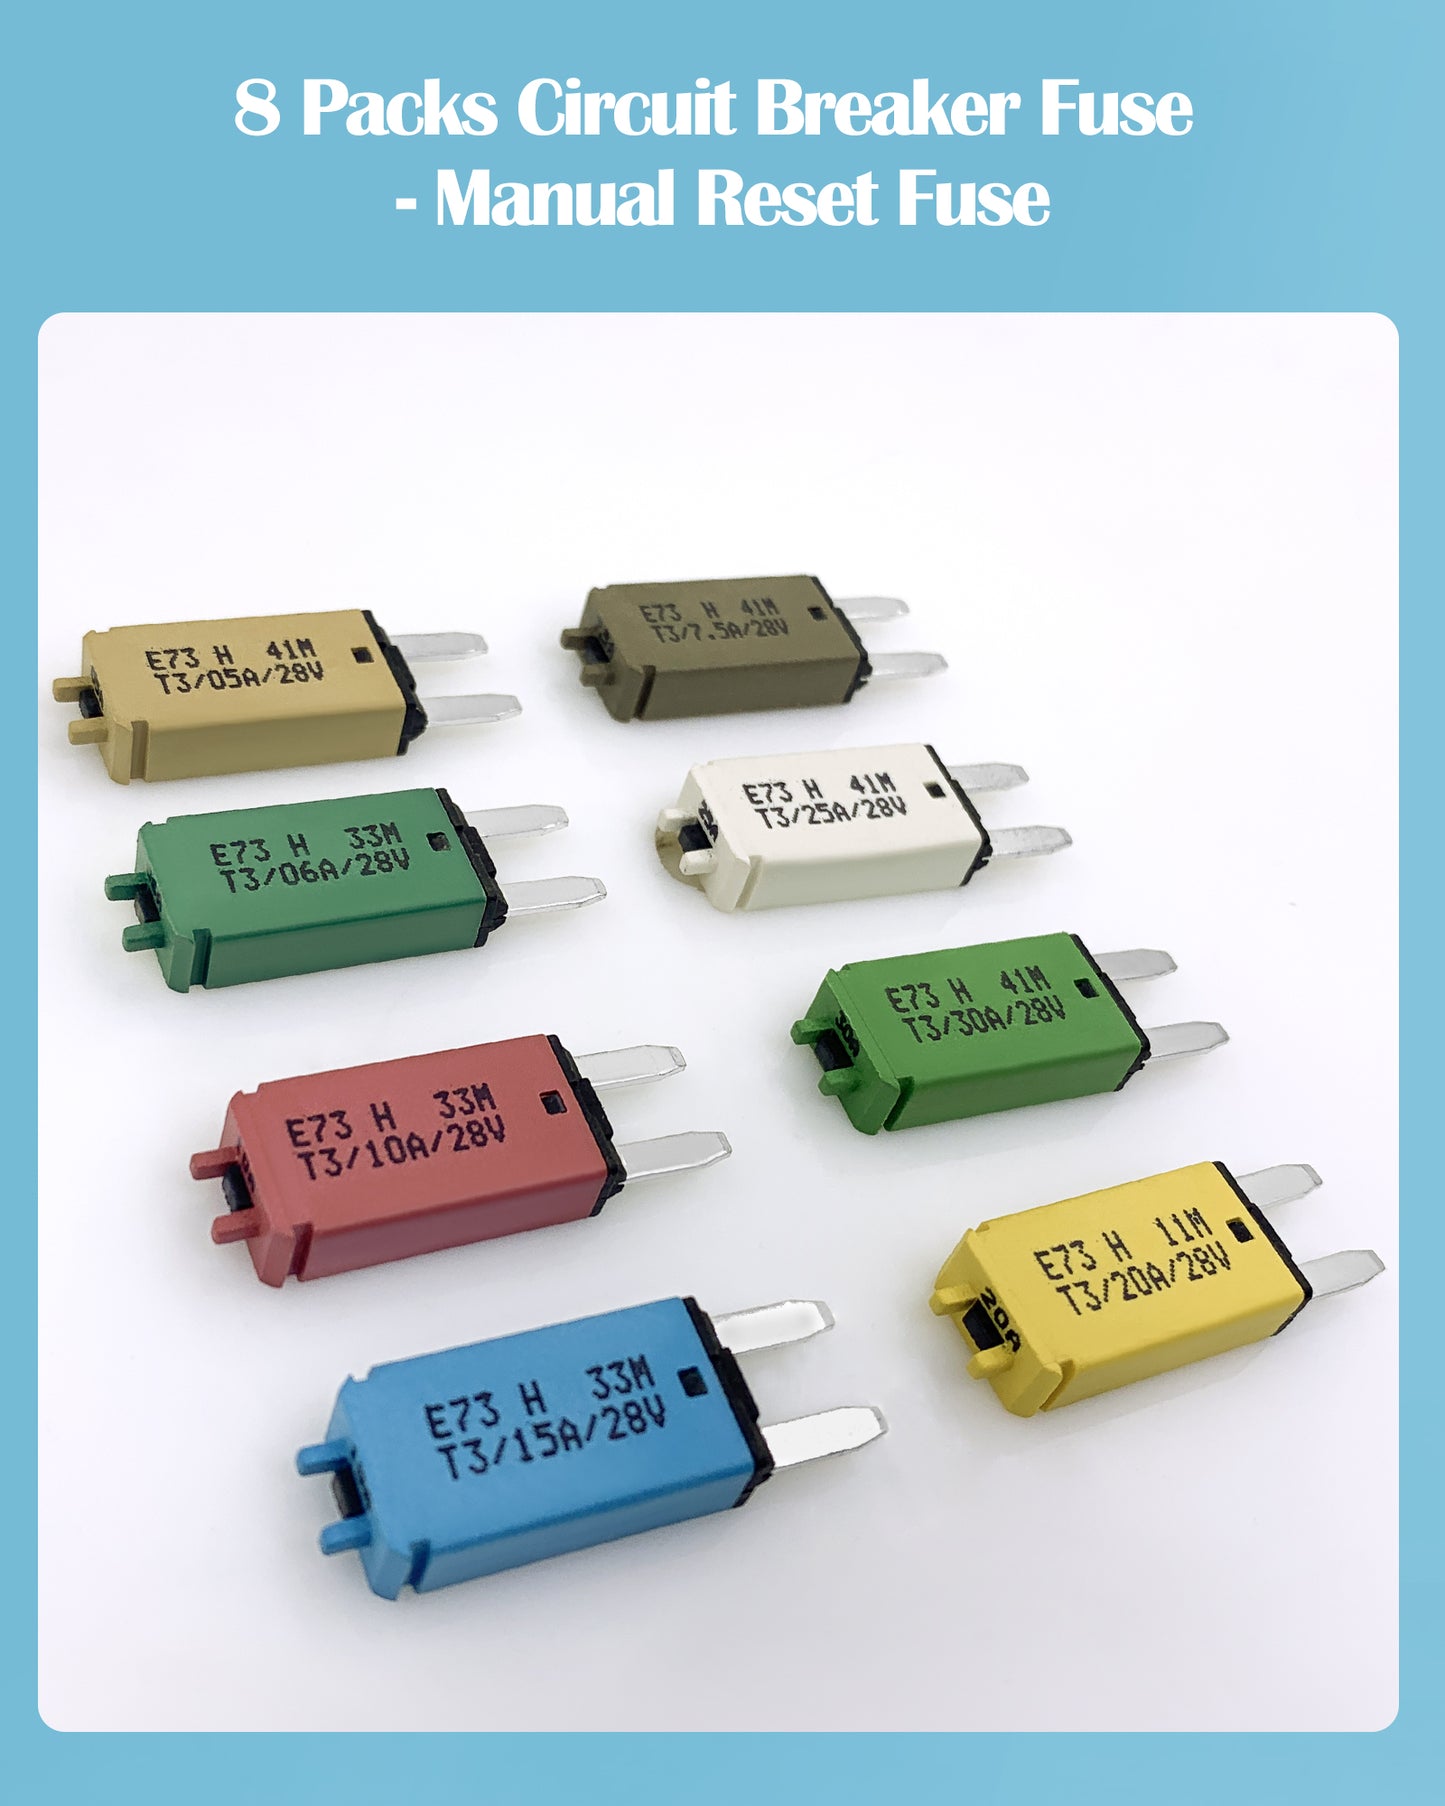 Nerites 8 Packs Resettable Fuse Mini ATM Blade Style Circuit Breaker Fuse 5A 6A 7.5A 10A 15A 20A 25A 30A(Mixed), 28V DC